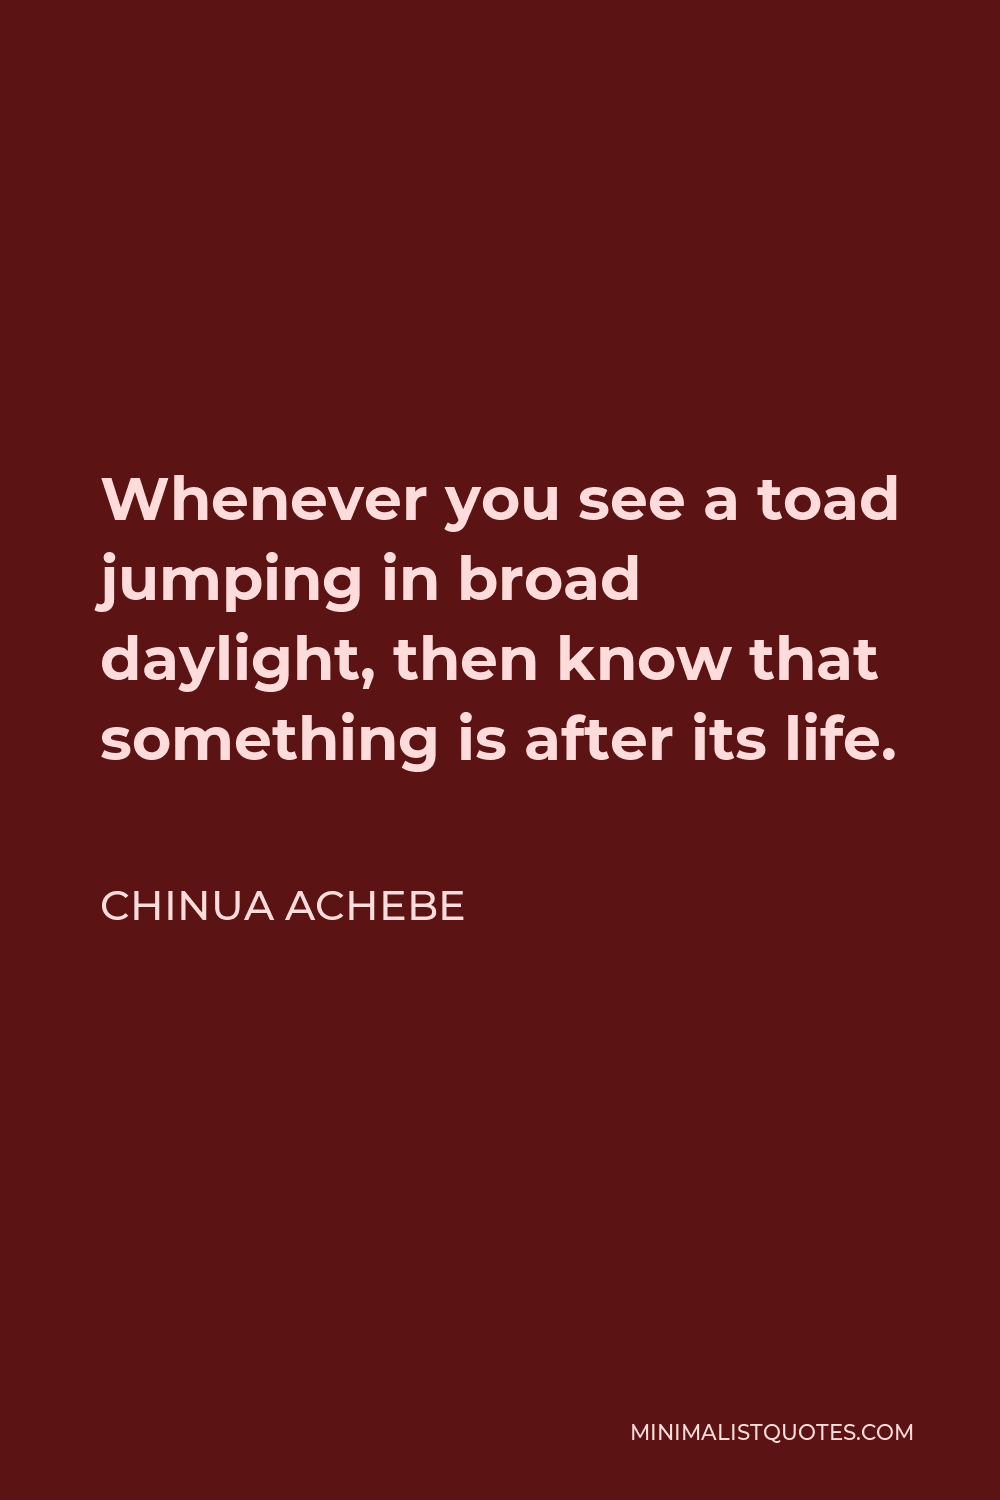 Chinua Achebe Quote - Whenever you see a toad jumping in broad daylight, then know that something is after its life.